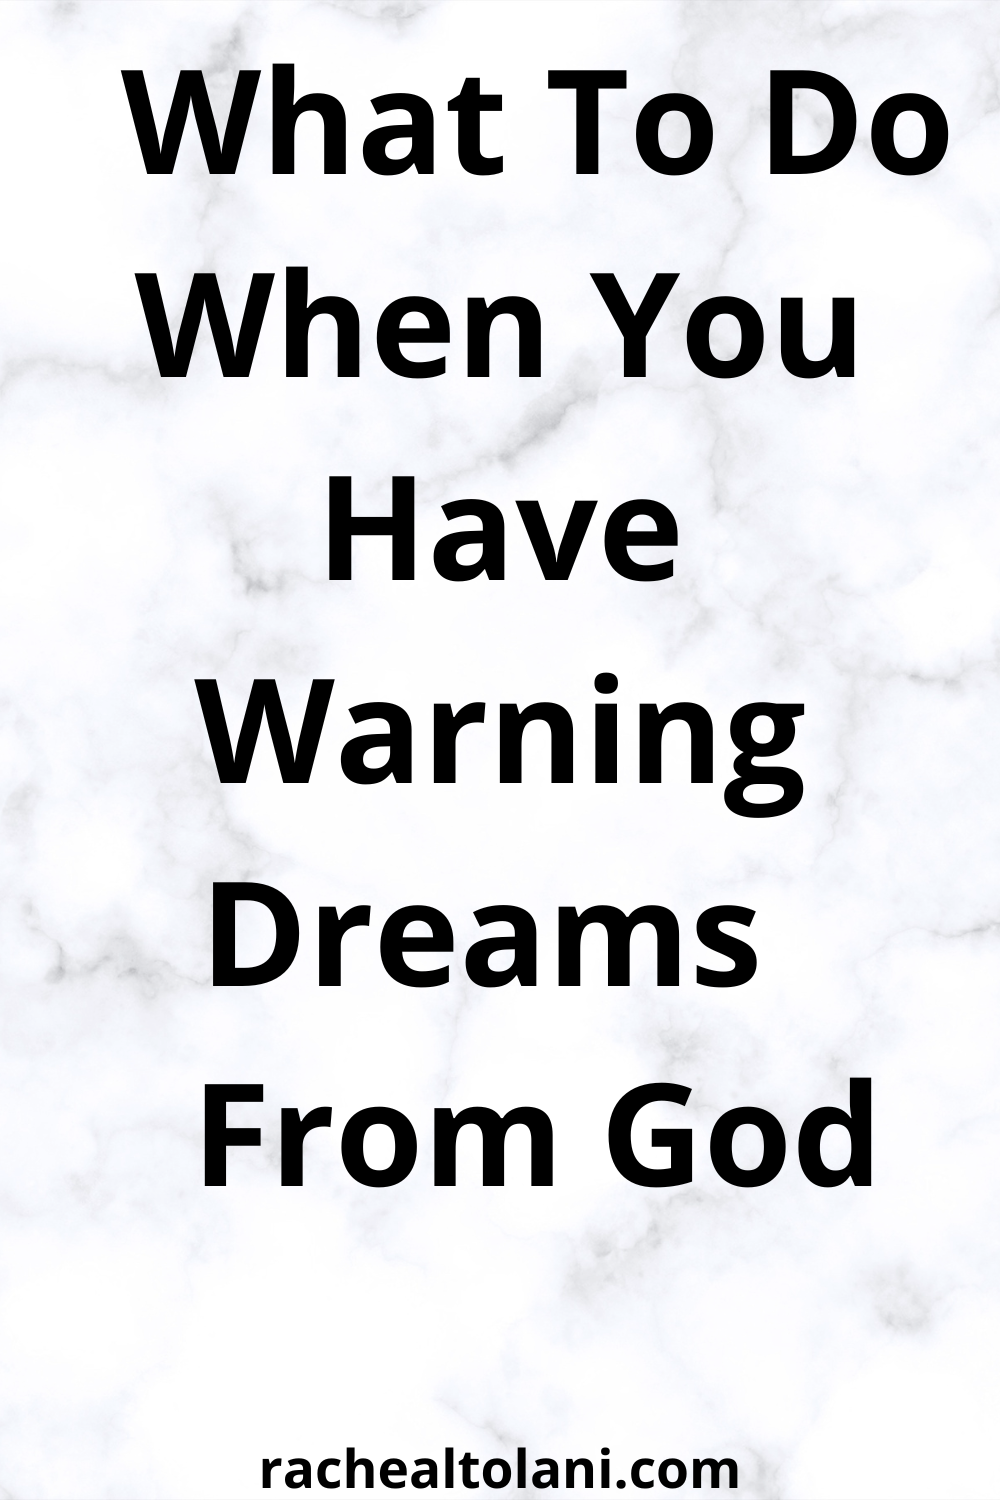 Signs Of Warning Dreams From God